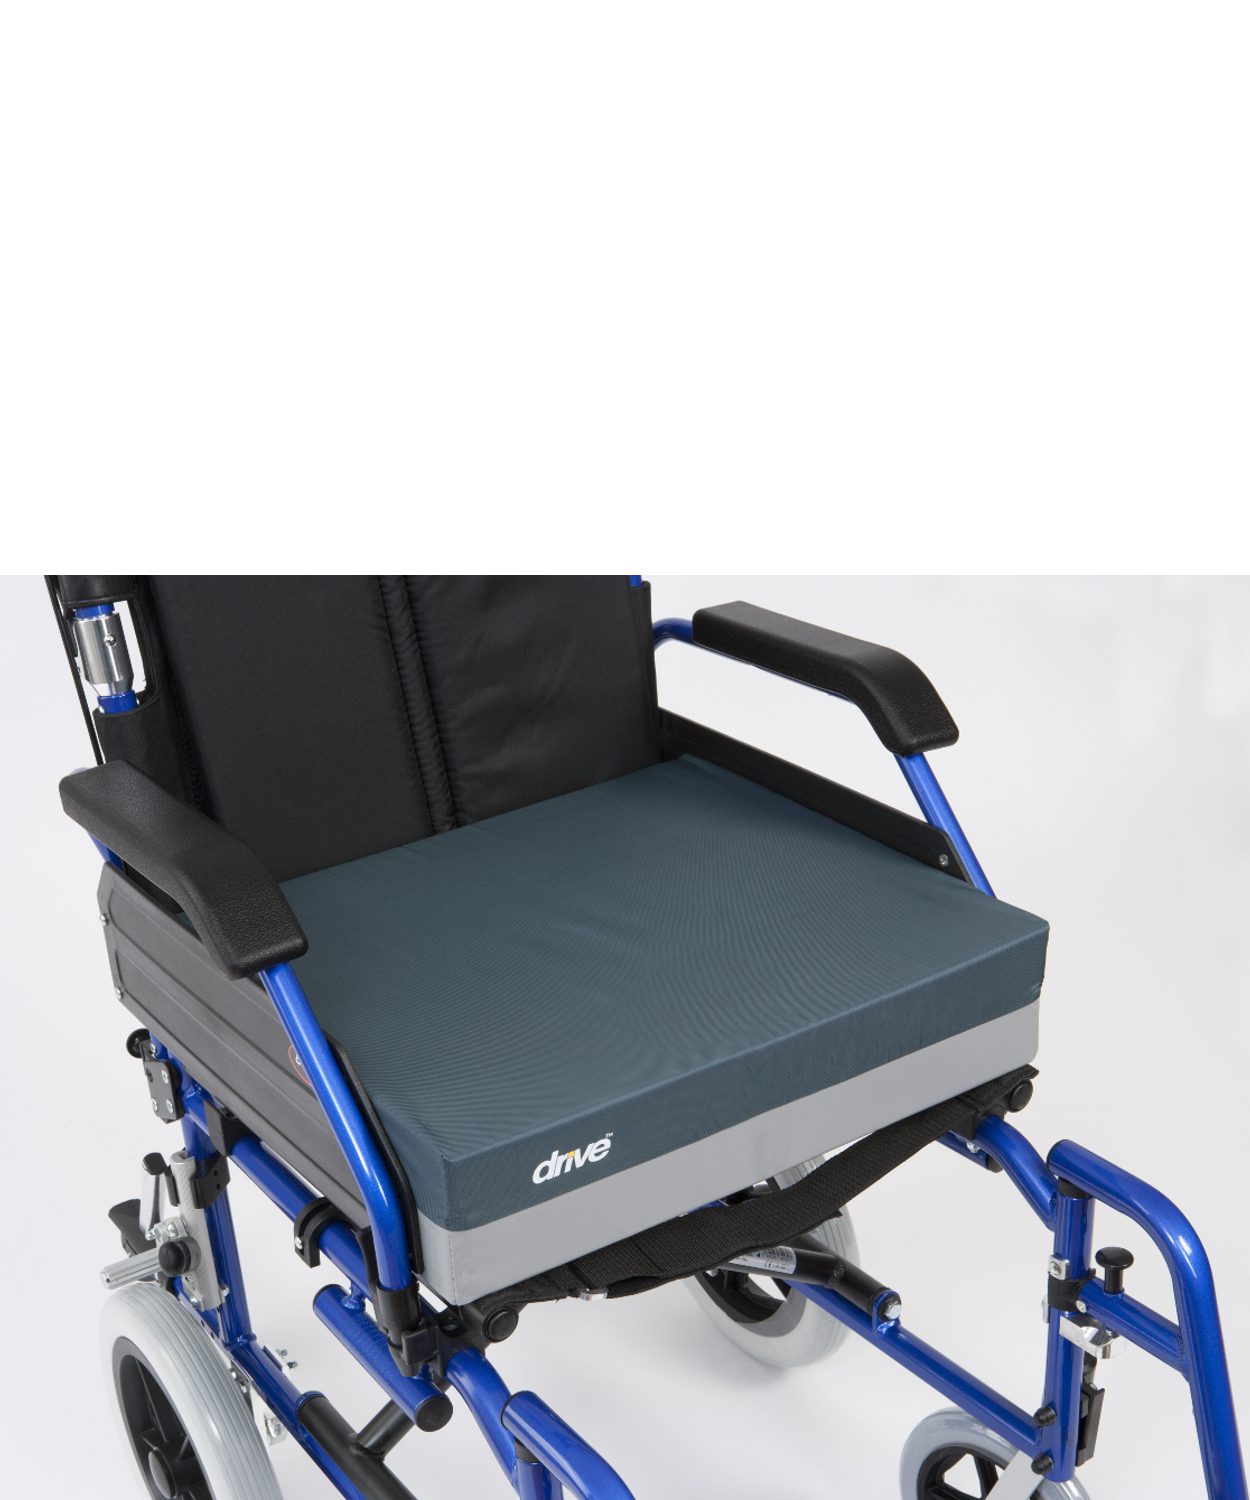 Gel Wheelchair Cushion - Prevent pressure sores and ulcers with a gel